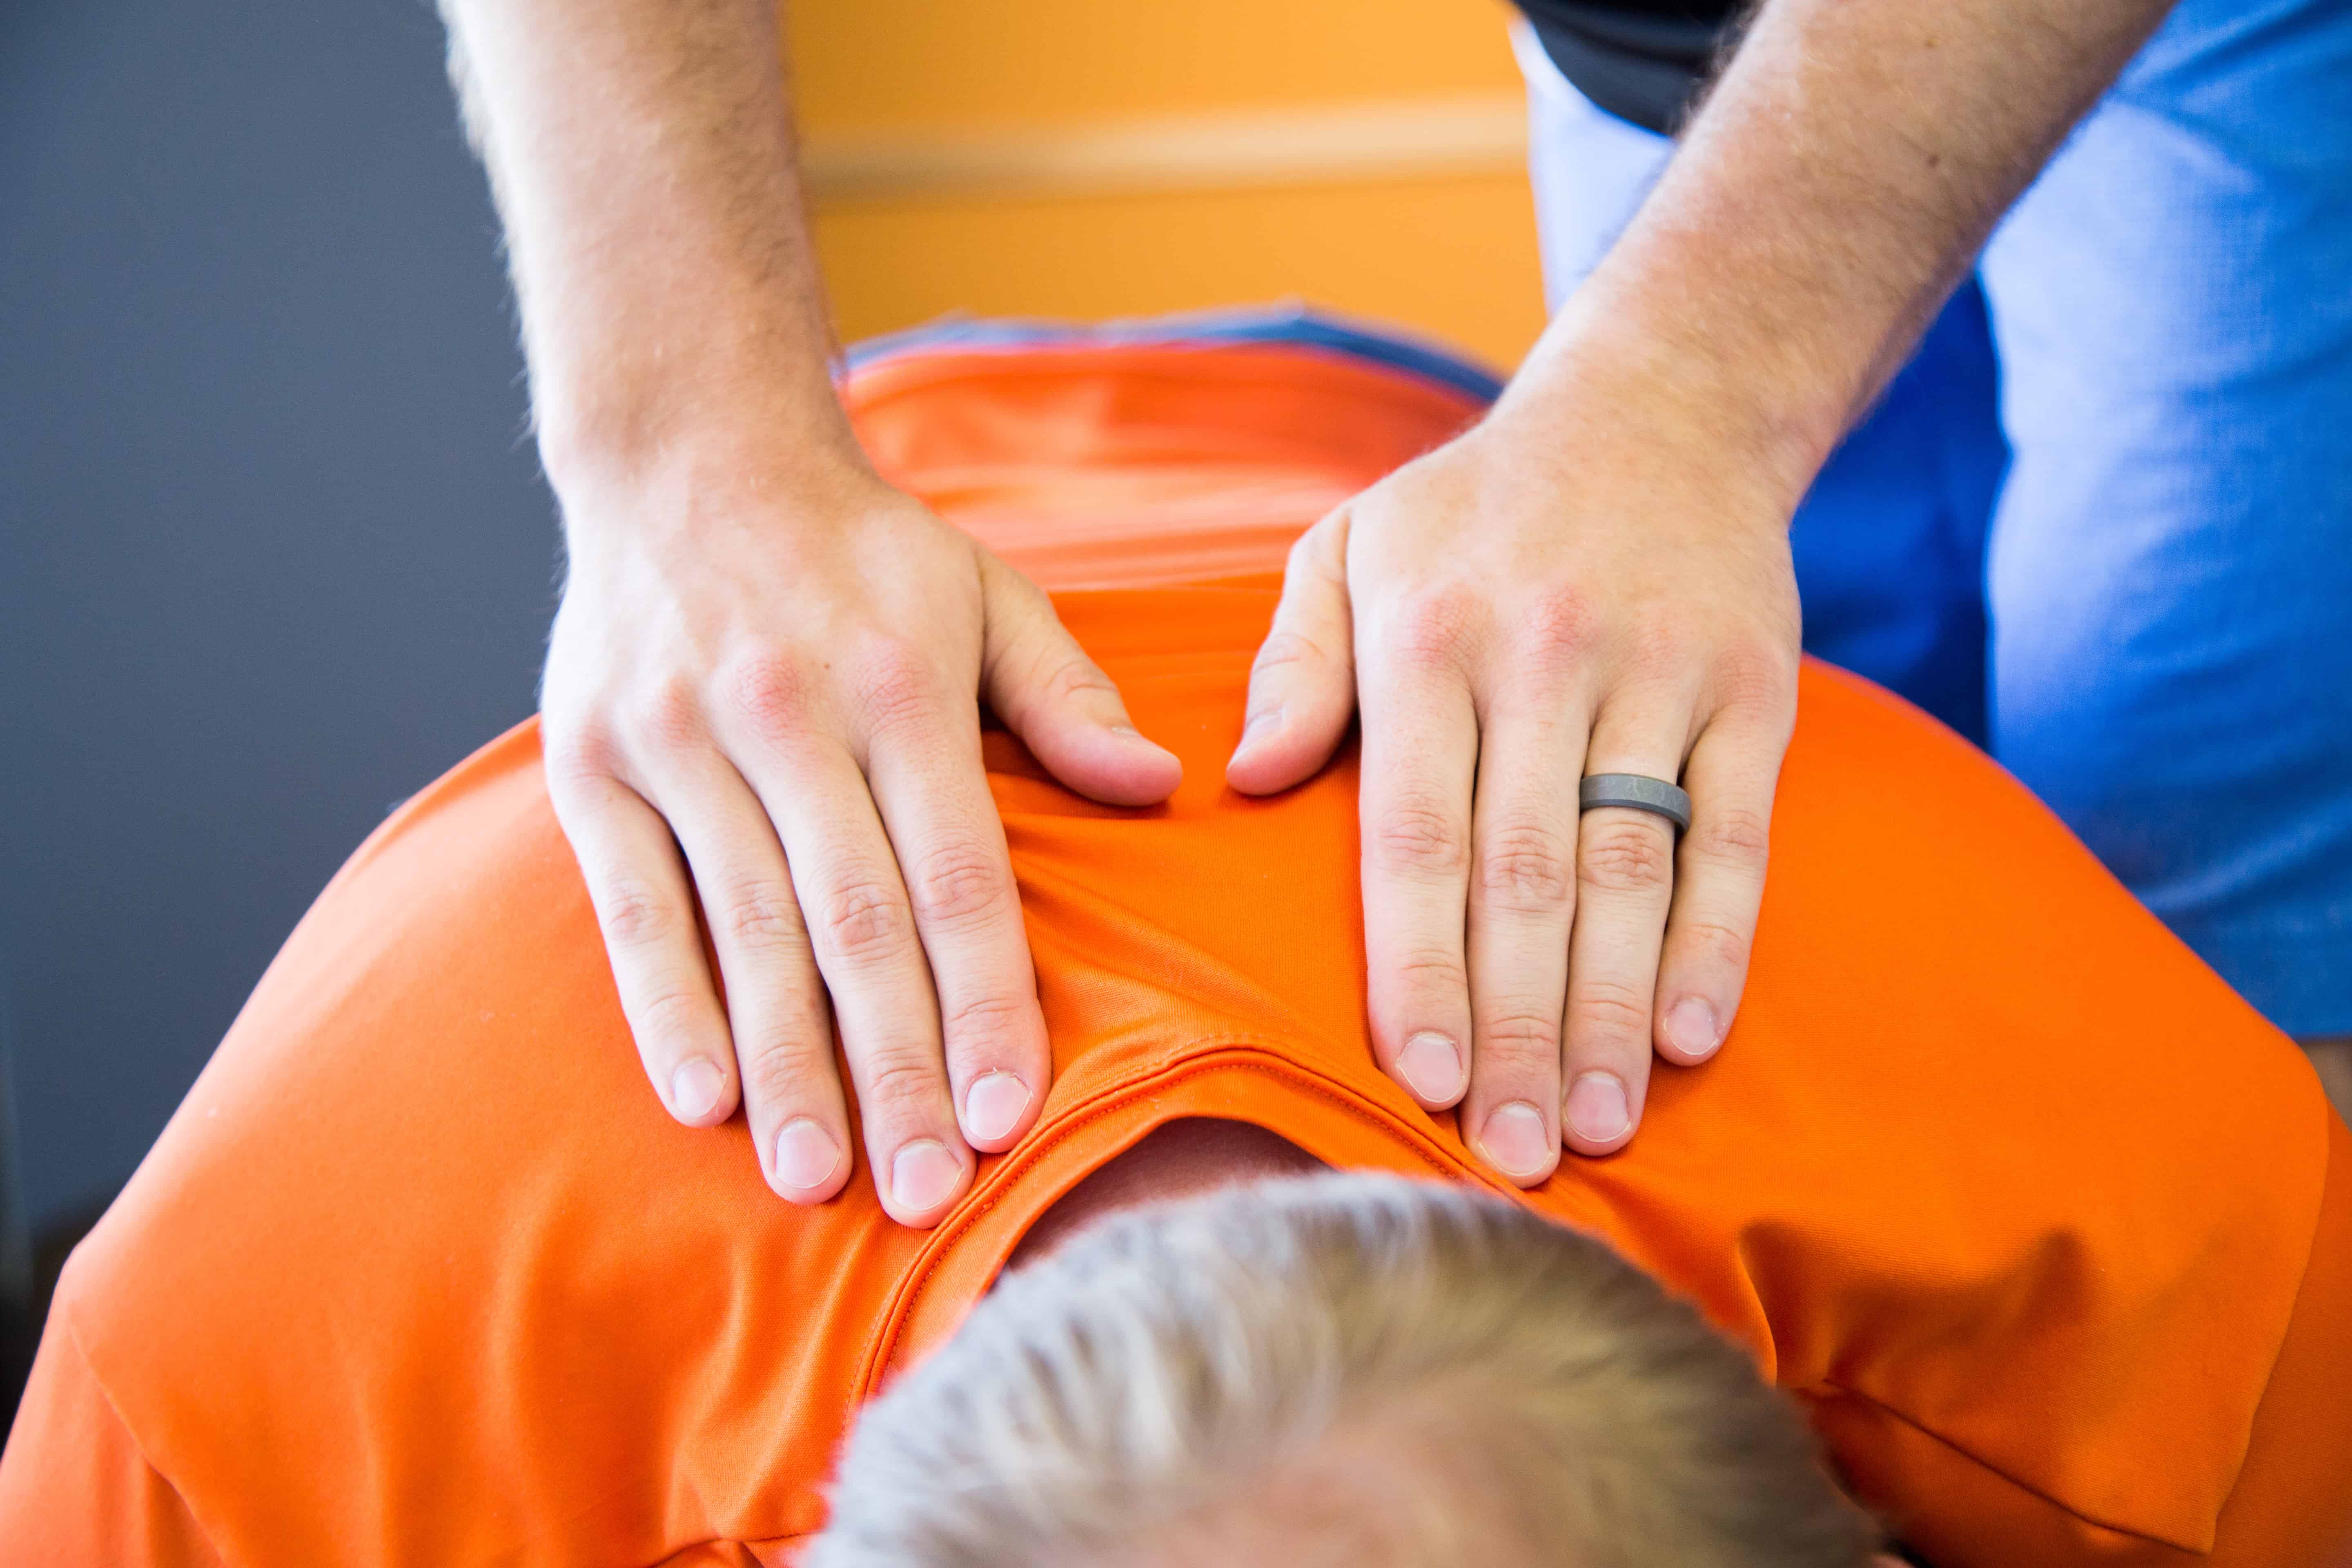 Chiropractor's hands palpating spine